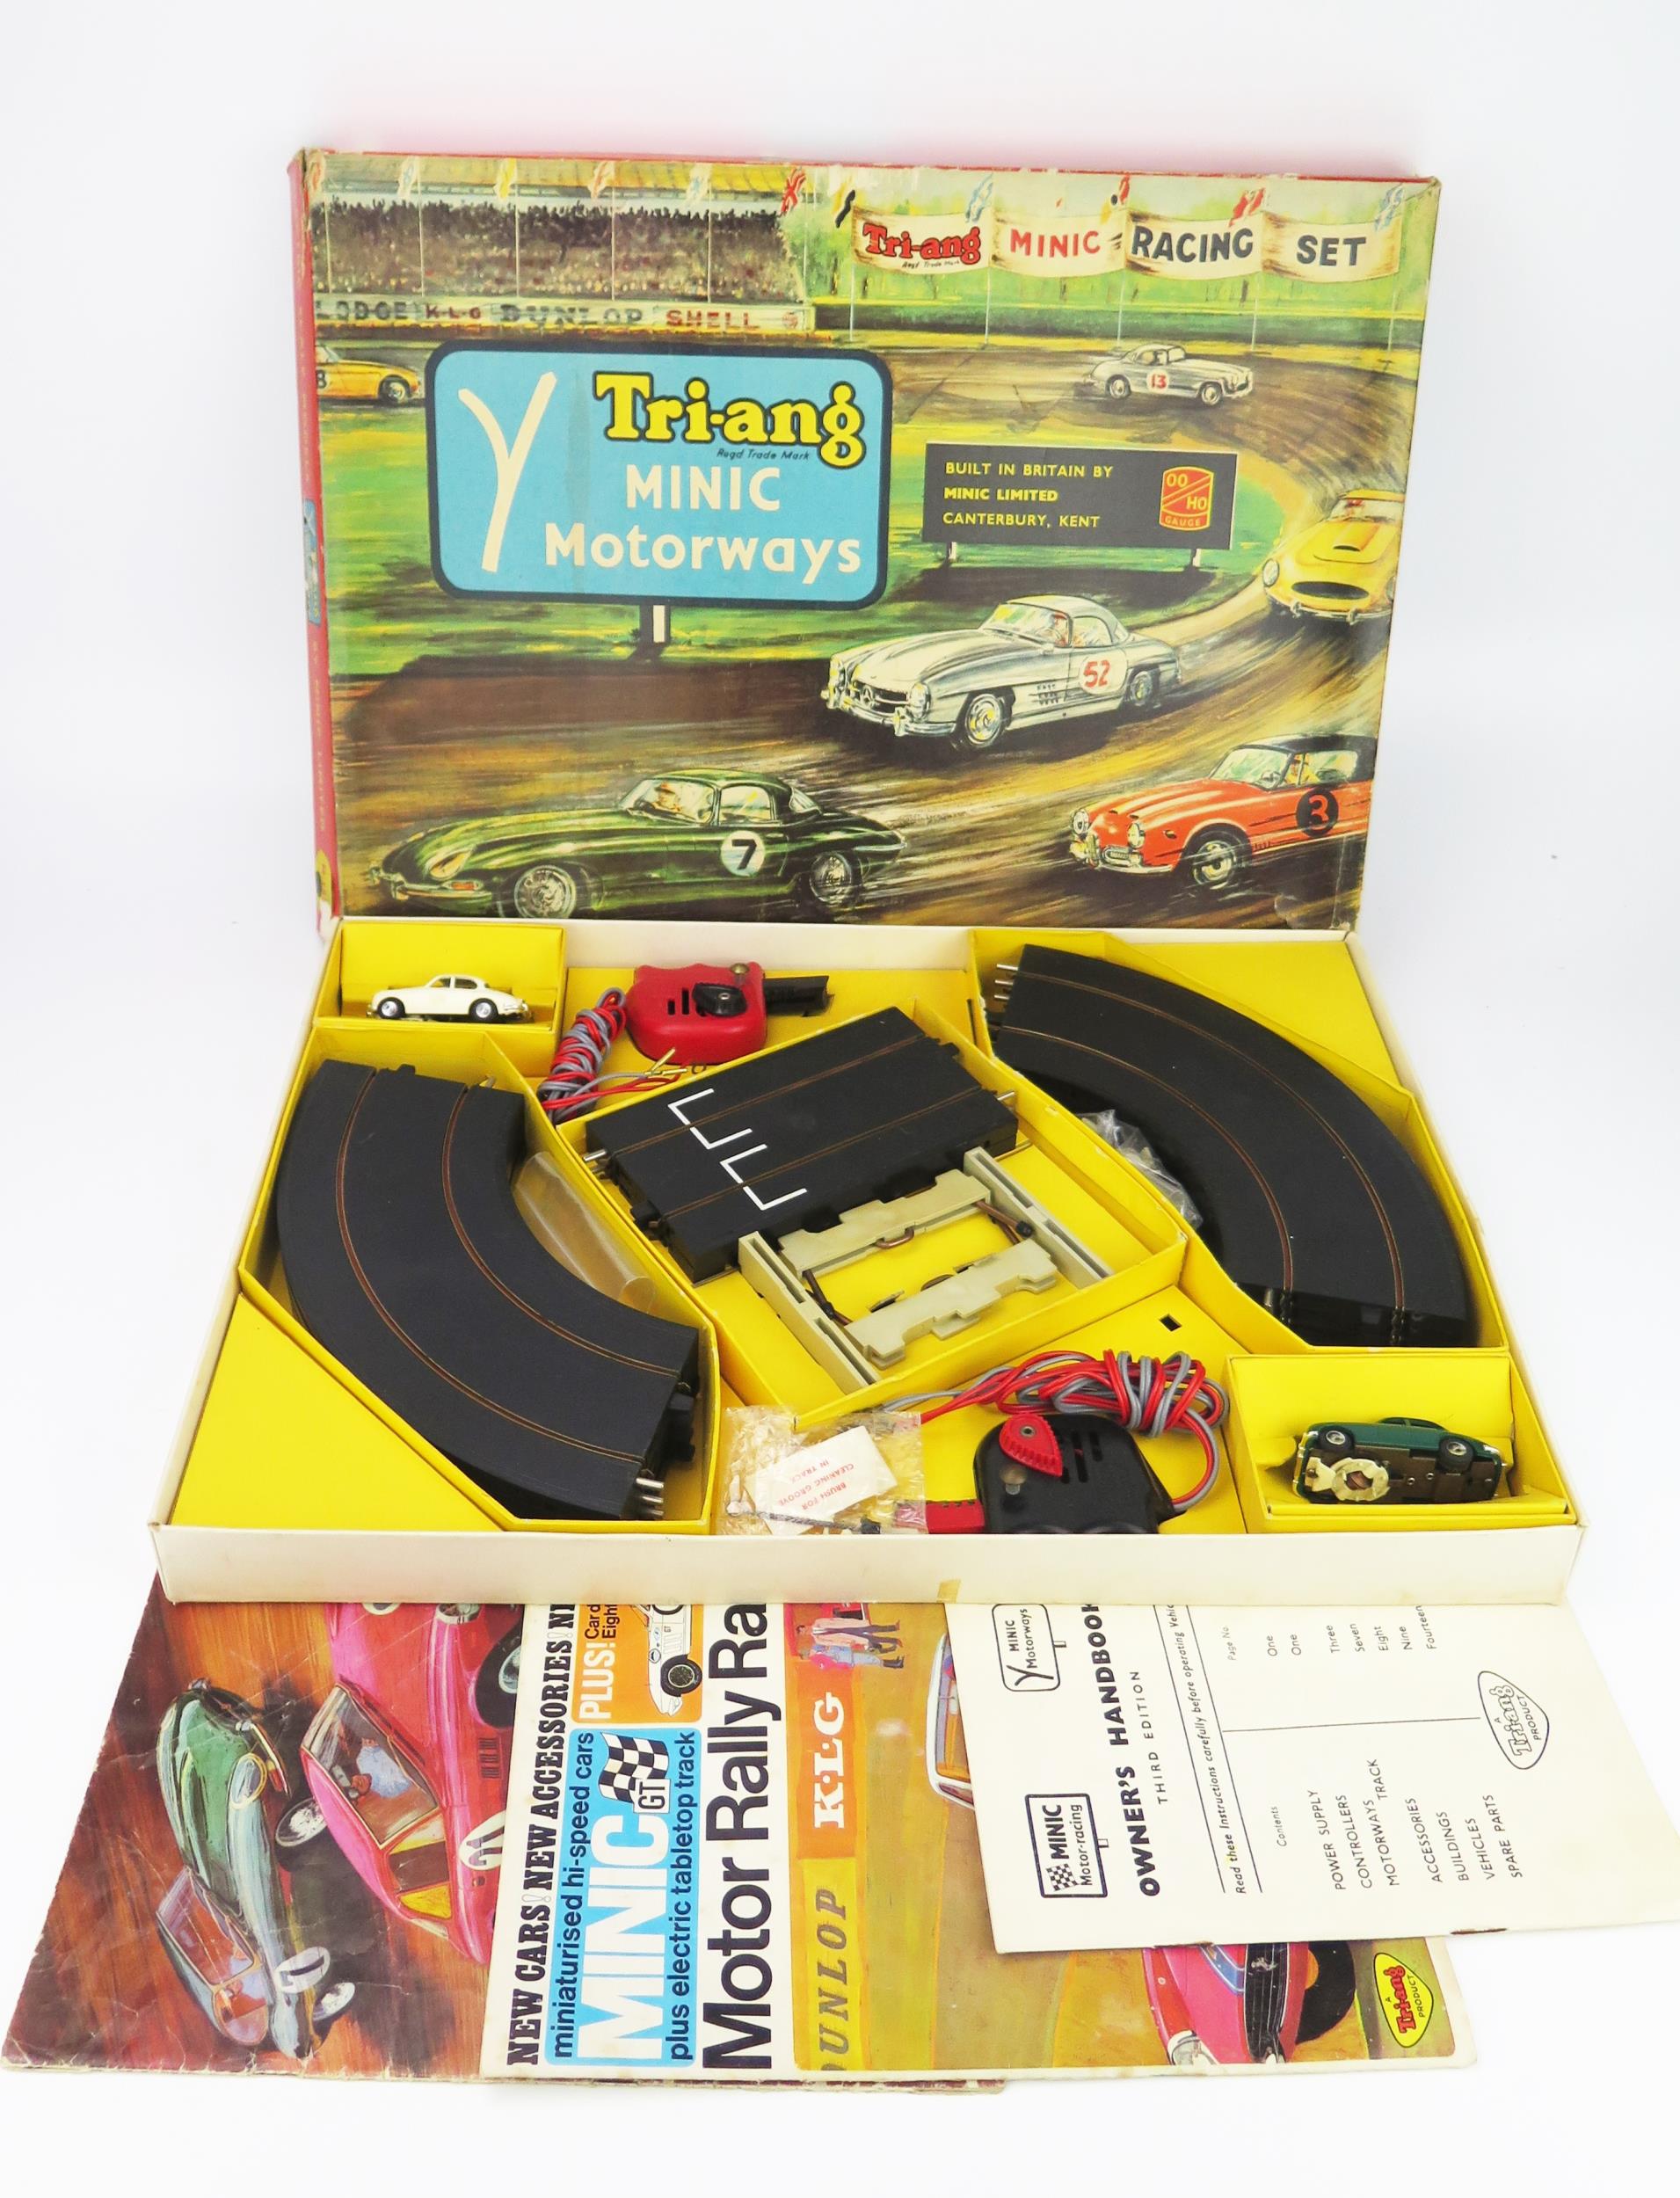 Triang Minic Motorways M1524 Racing Set with two Jaguar 3.4 Litres in white and green - excellent in